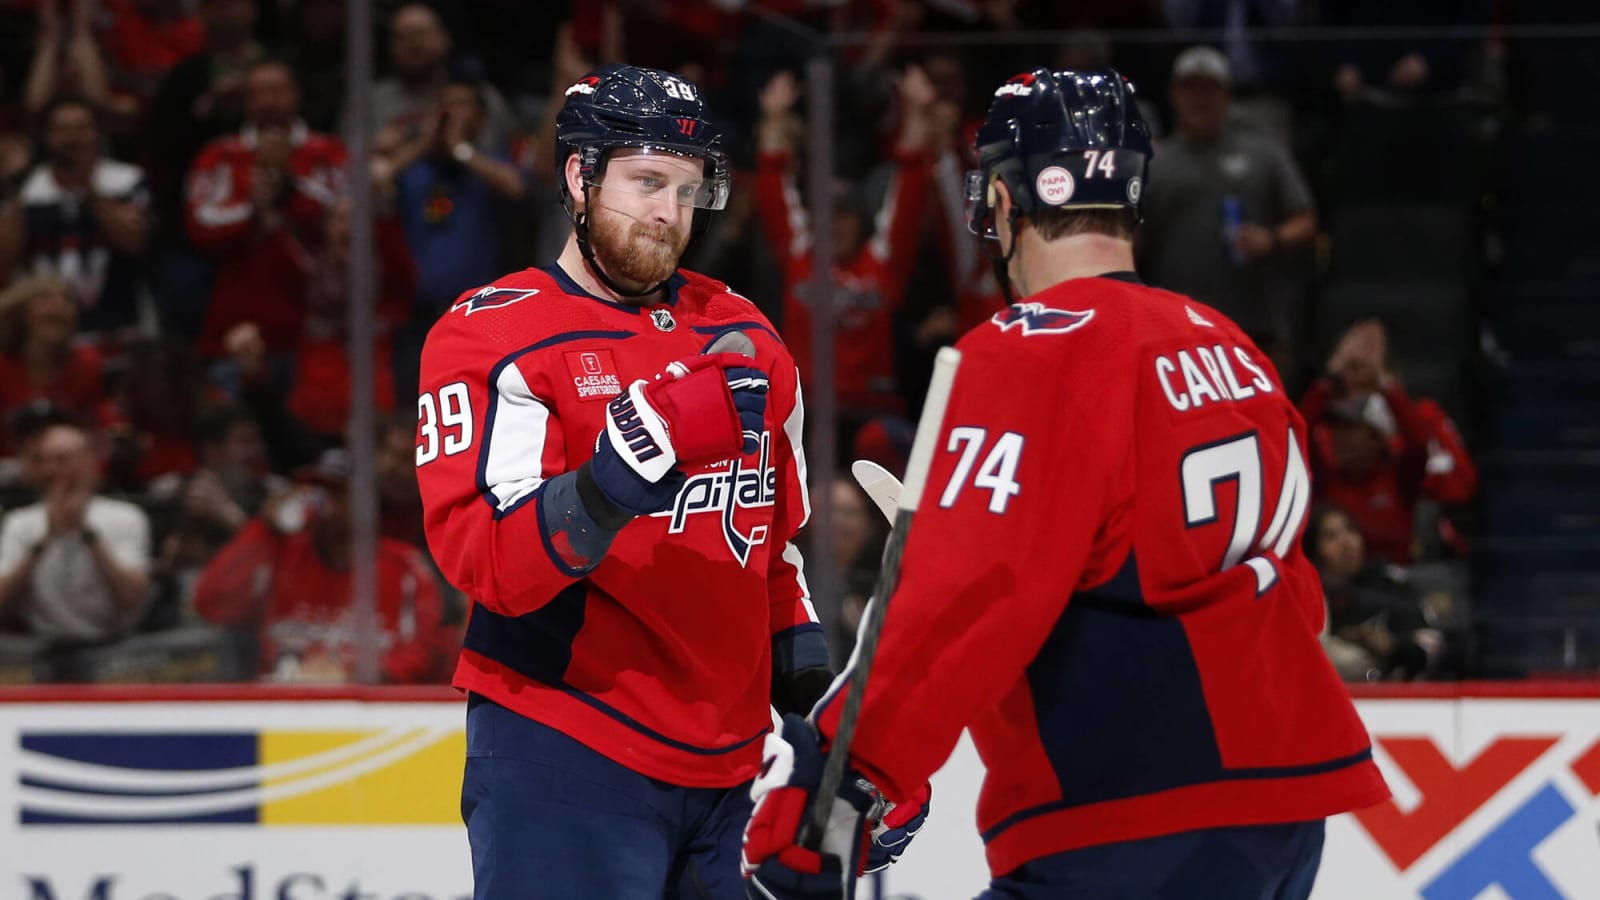 Phillips In, Mantha Out: Predicting Capitals’ Opening Night Roster, Lines